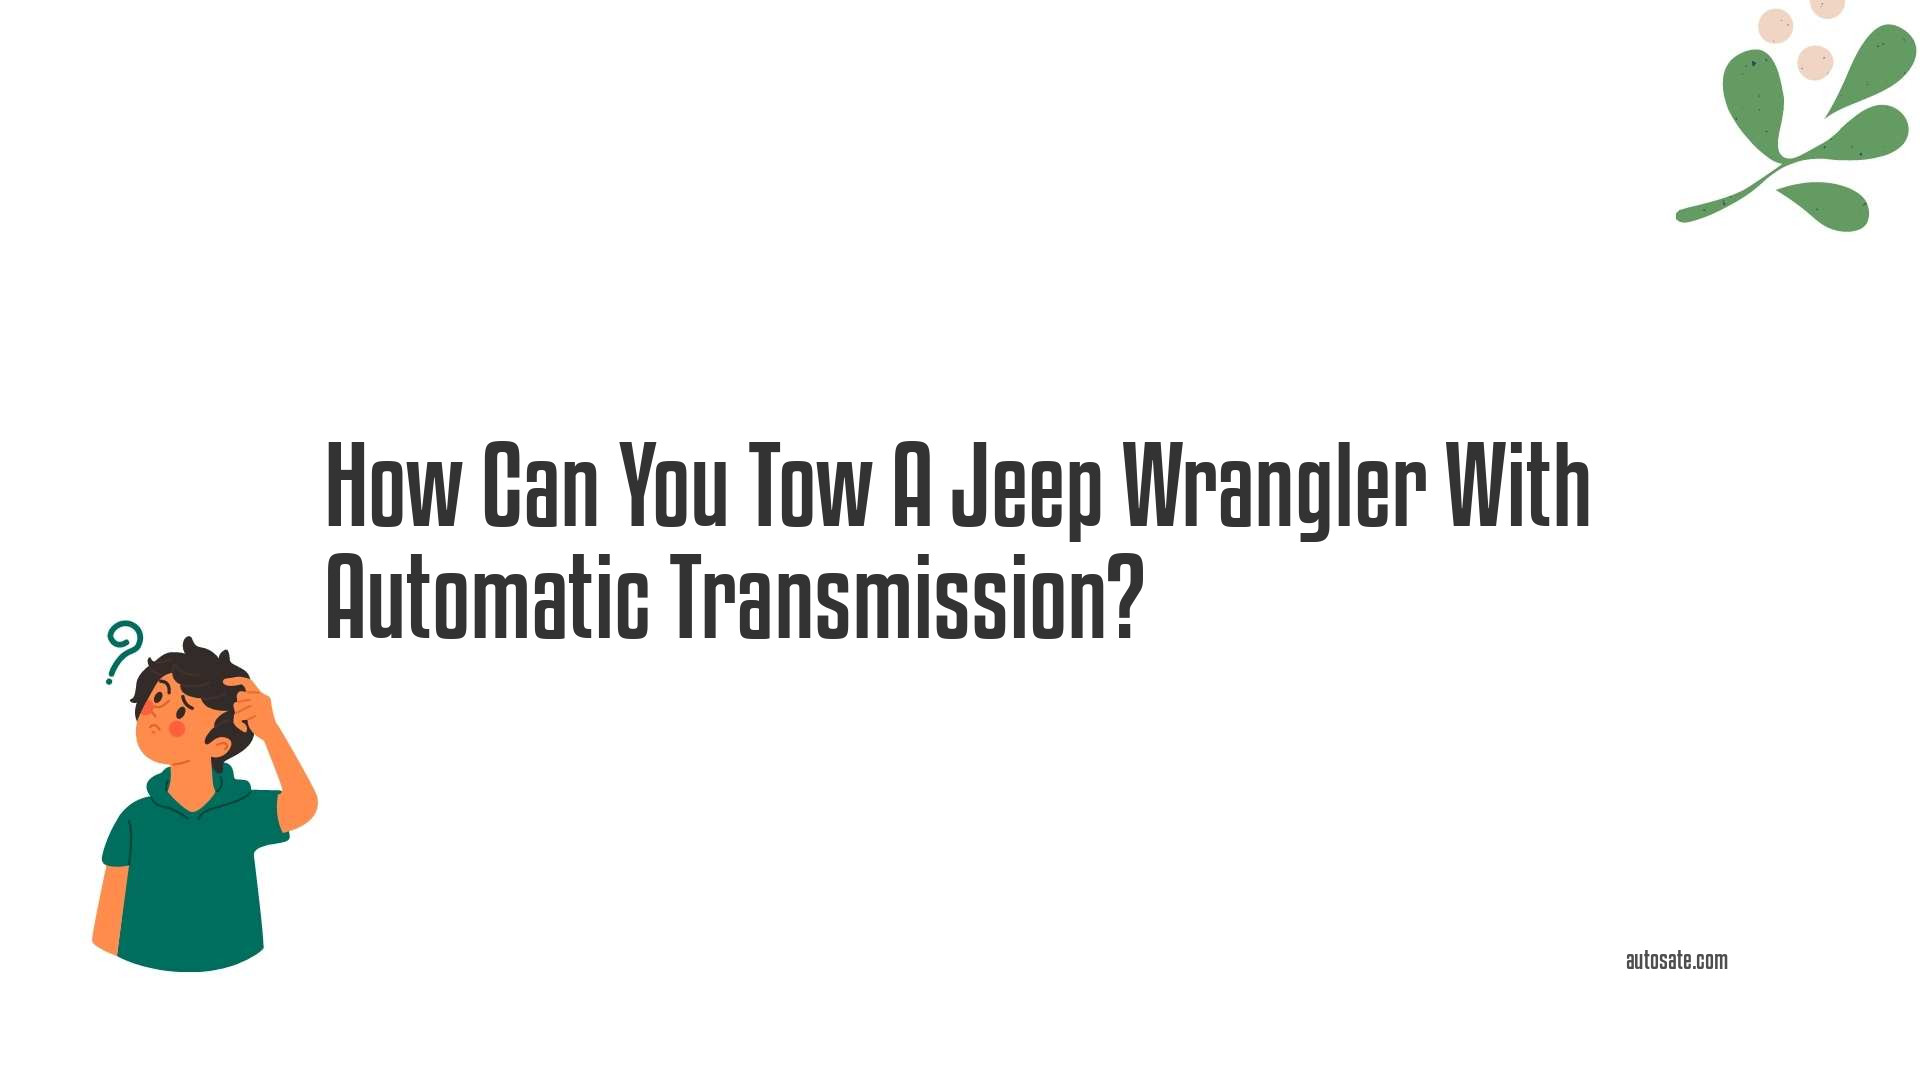 How Can You Tow A Jeep Wrangler With Automatic Transmission?